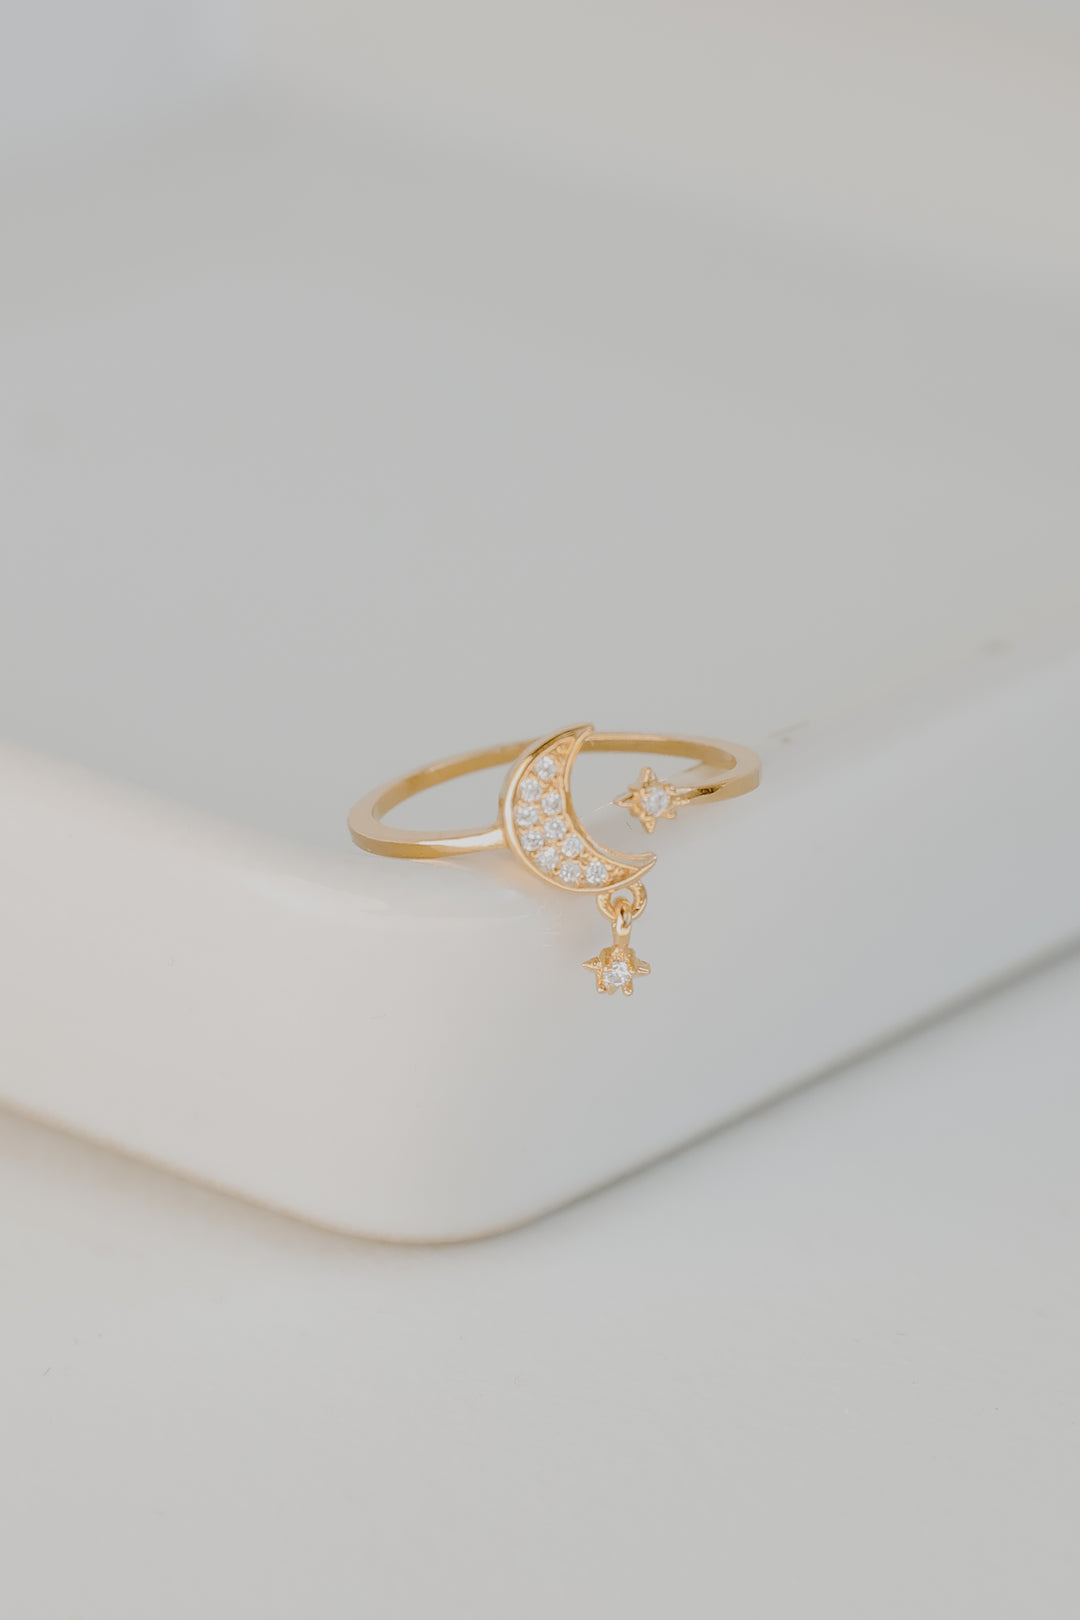 Gold Rhinestone Star + Moon Ring from dress up